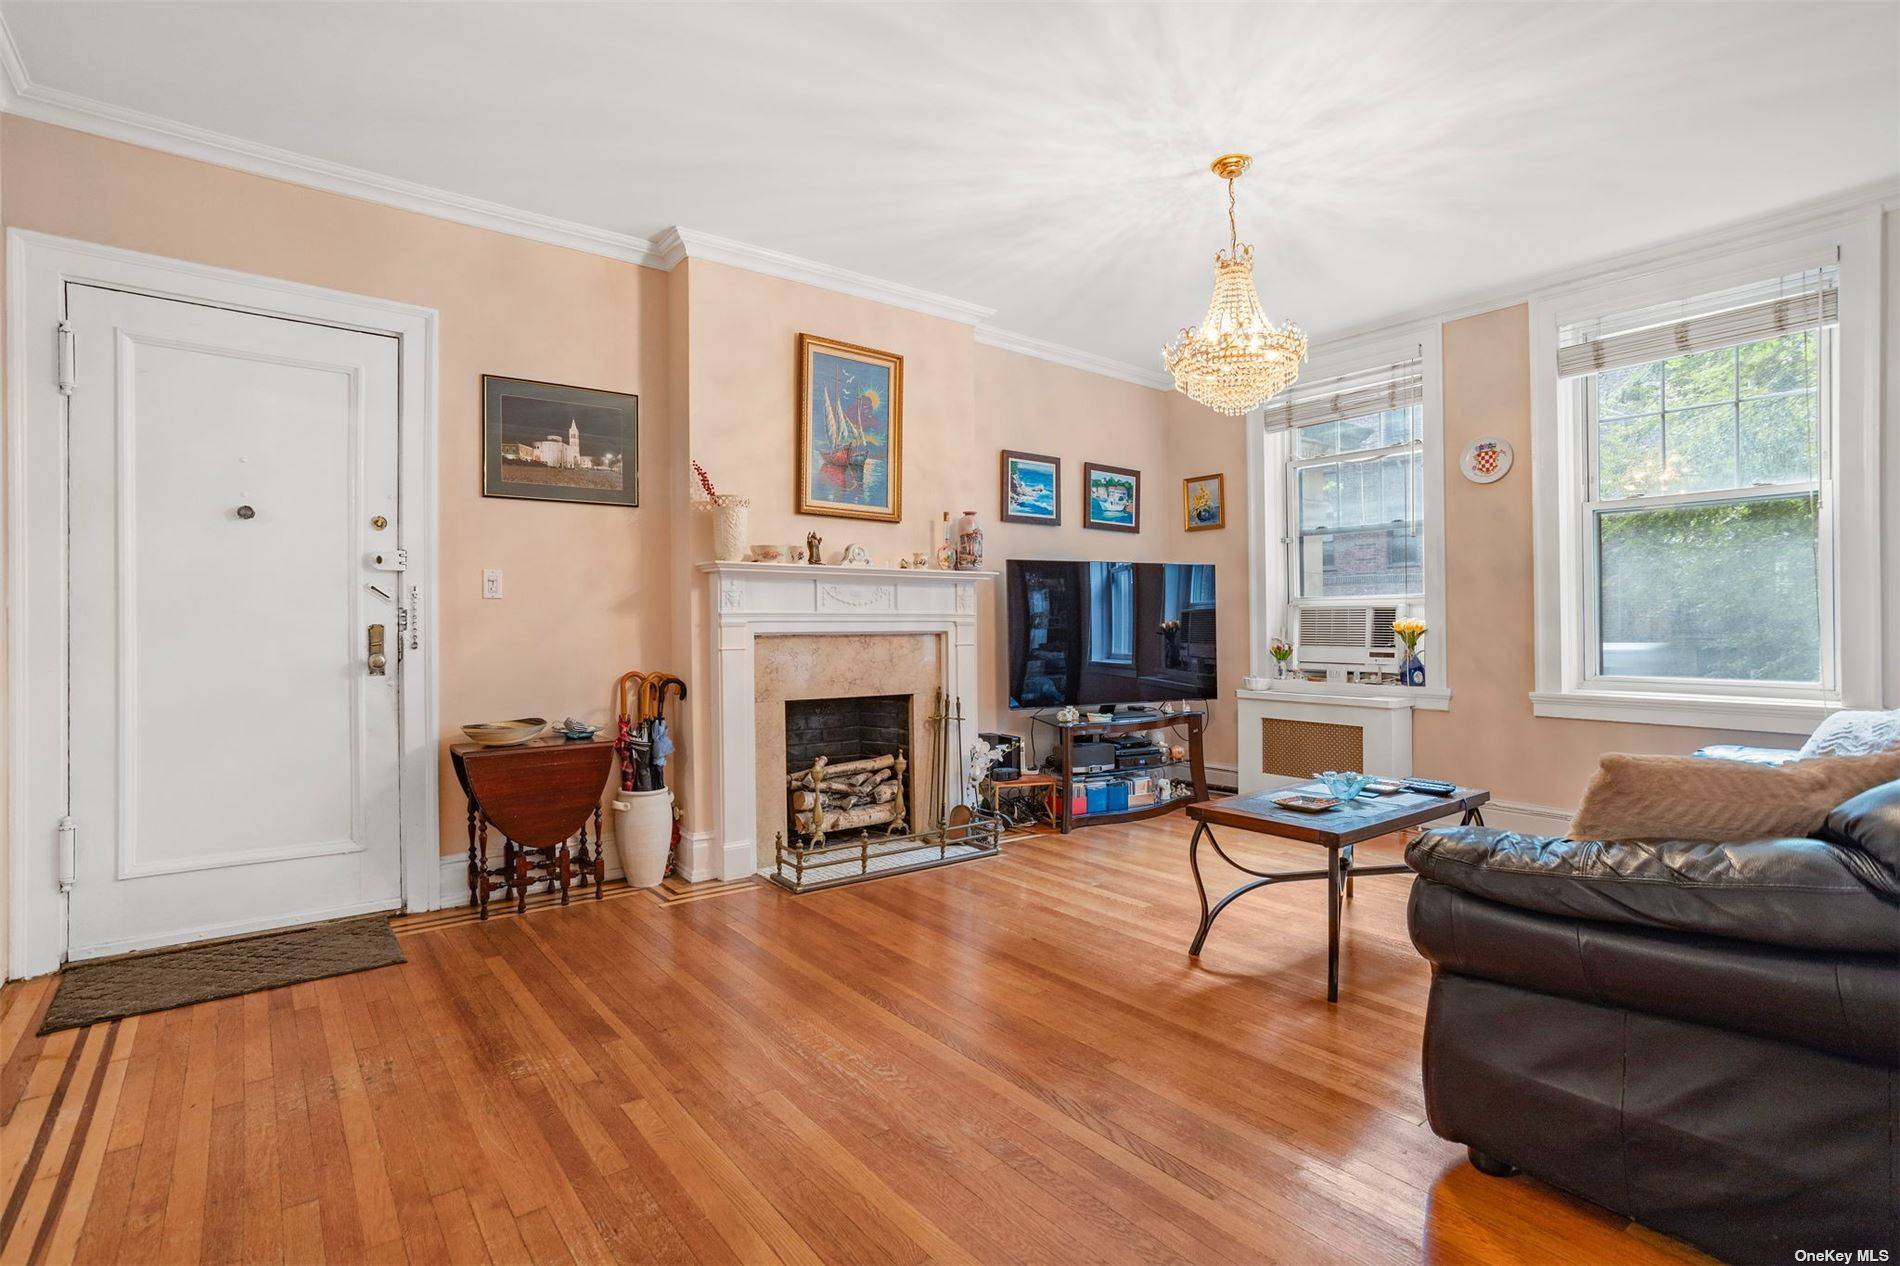 Welcoming 20 down payment, discover the blend of historic charm and modern living in this exquisite apartment situated in the heart of the Historic District of Jackson Heights.